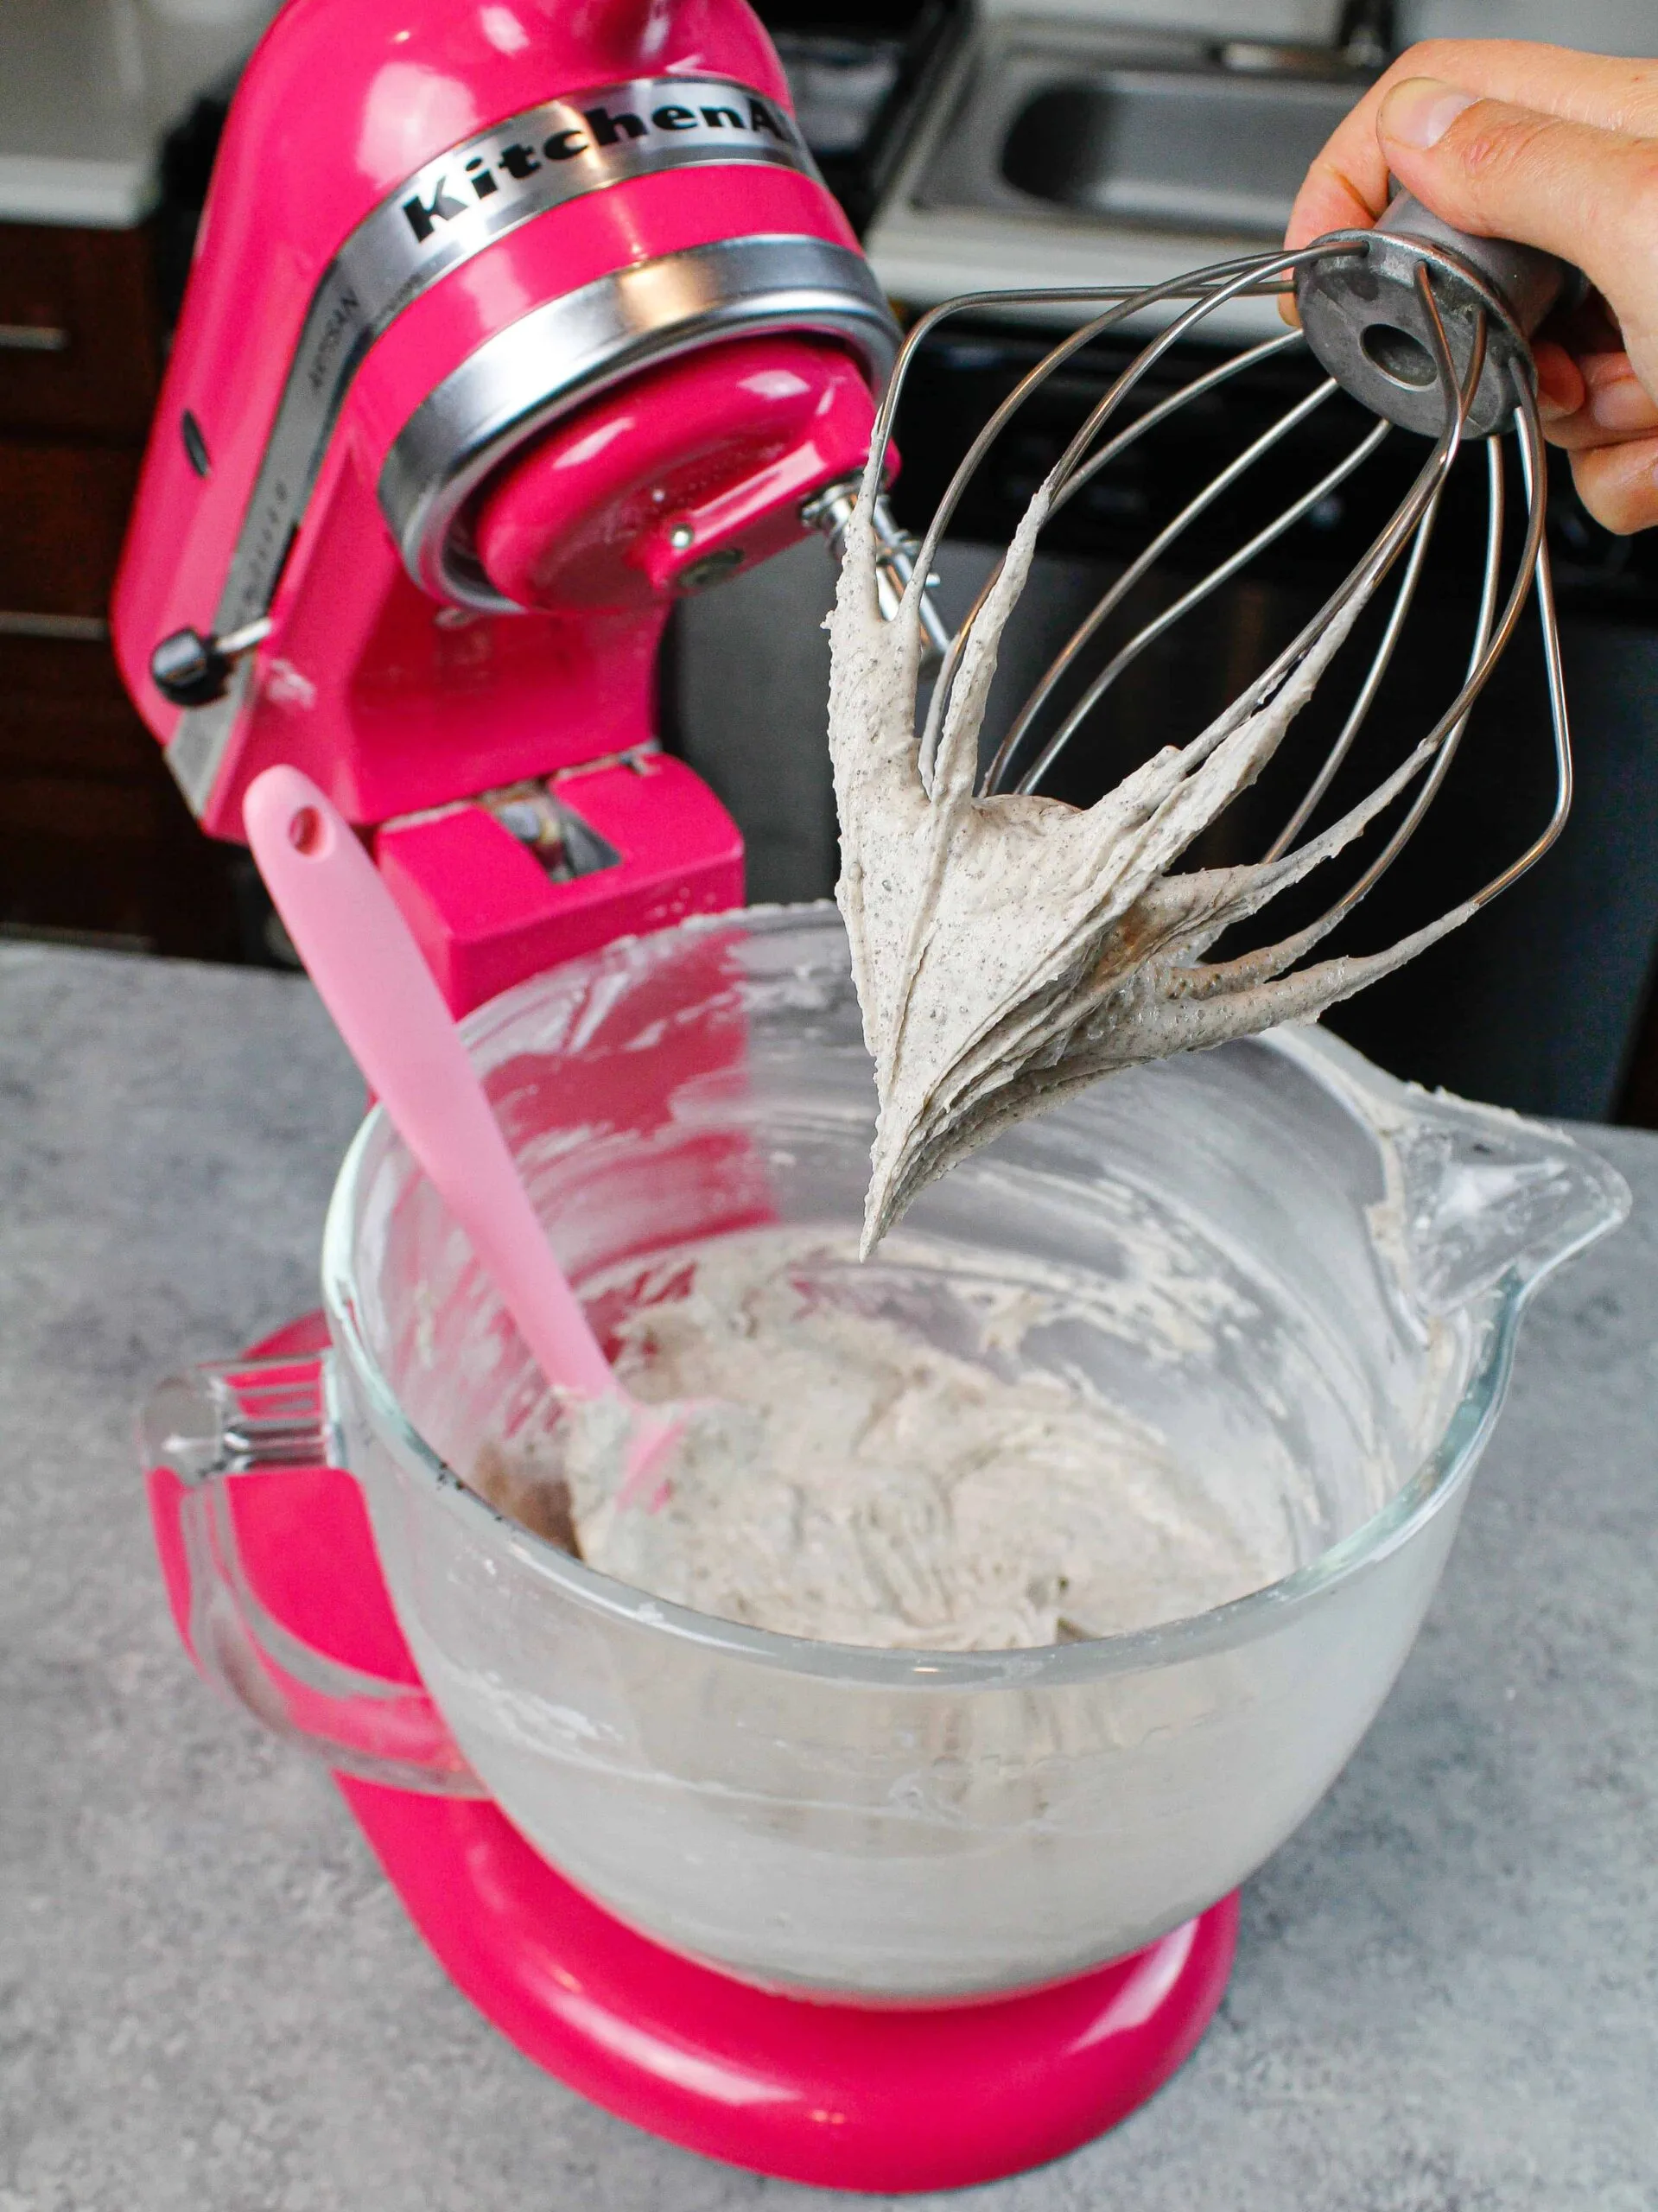 image of oreo frosting on a whisk attachment, after just being made in a pink stand mixer